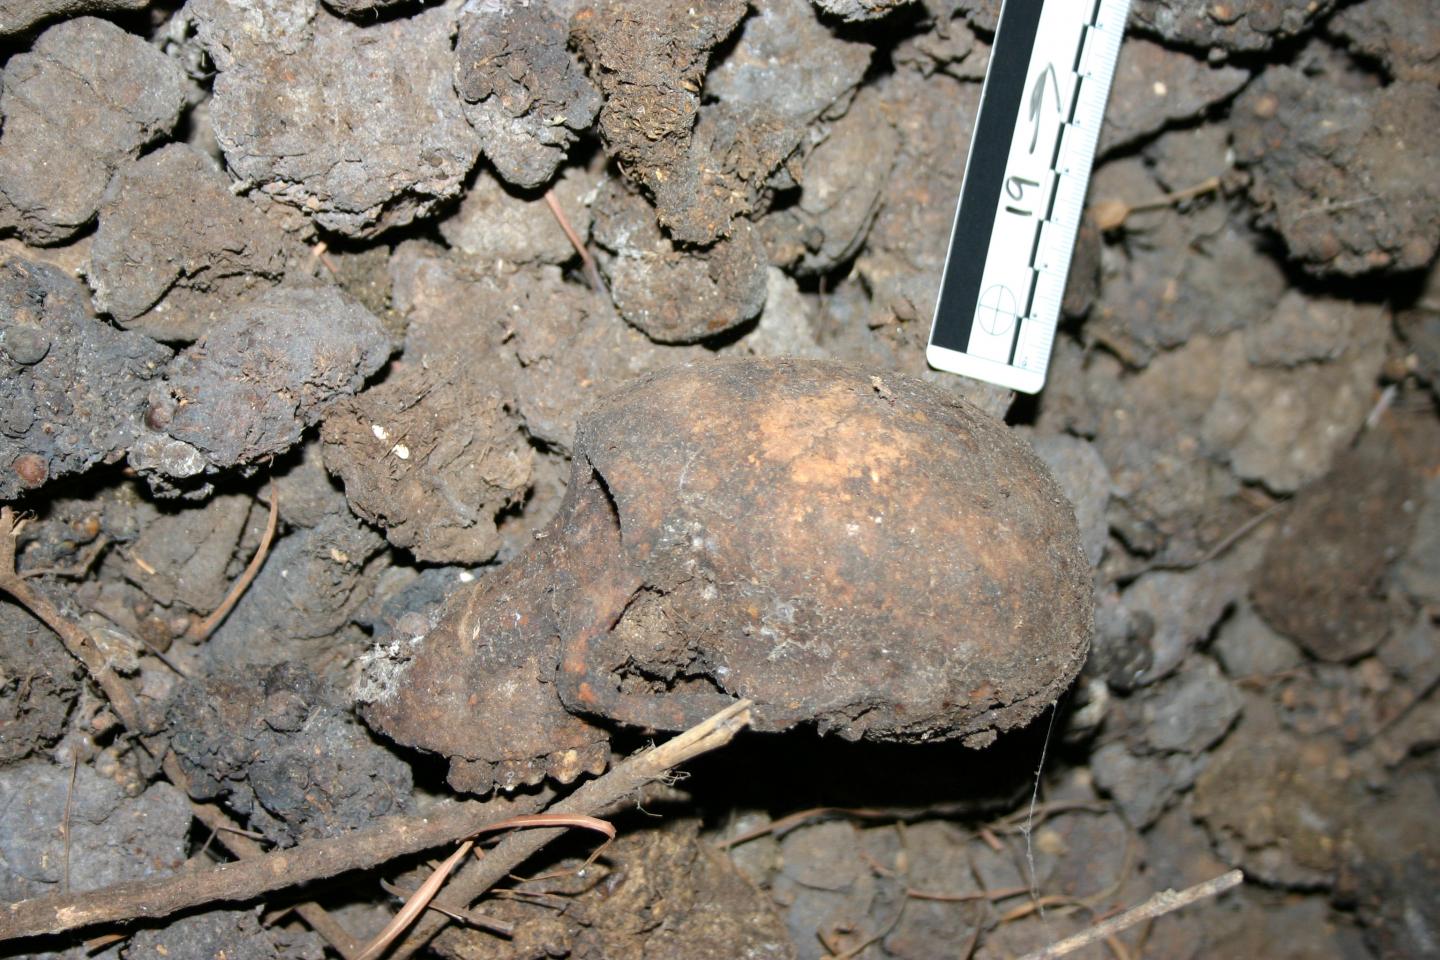 Side View of a Baboon Cranium from Misgrot Cave, South Africa